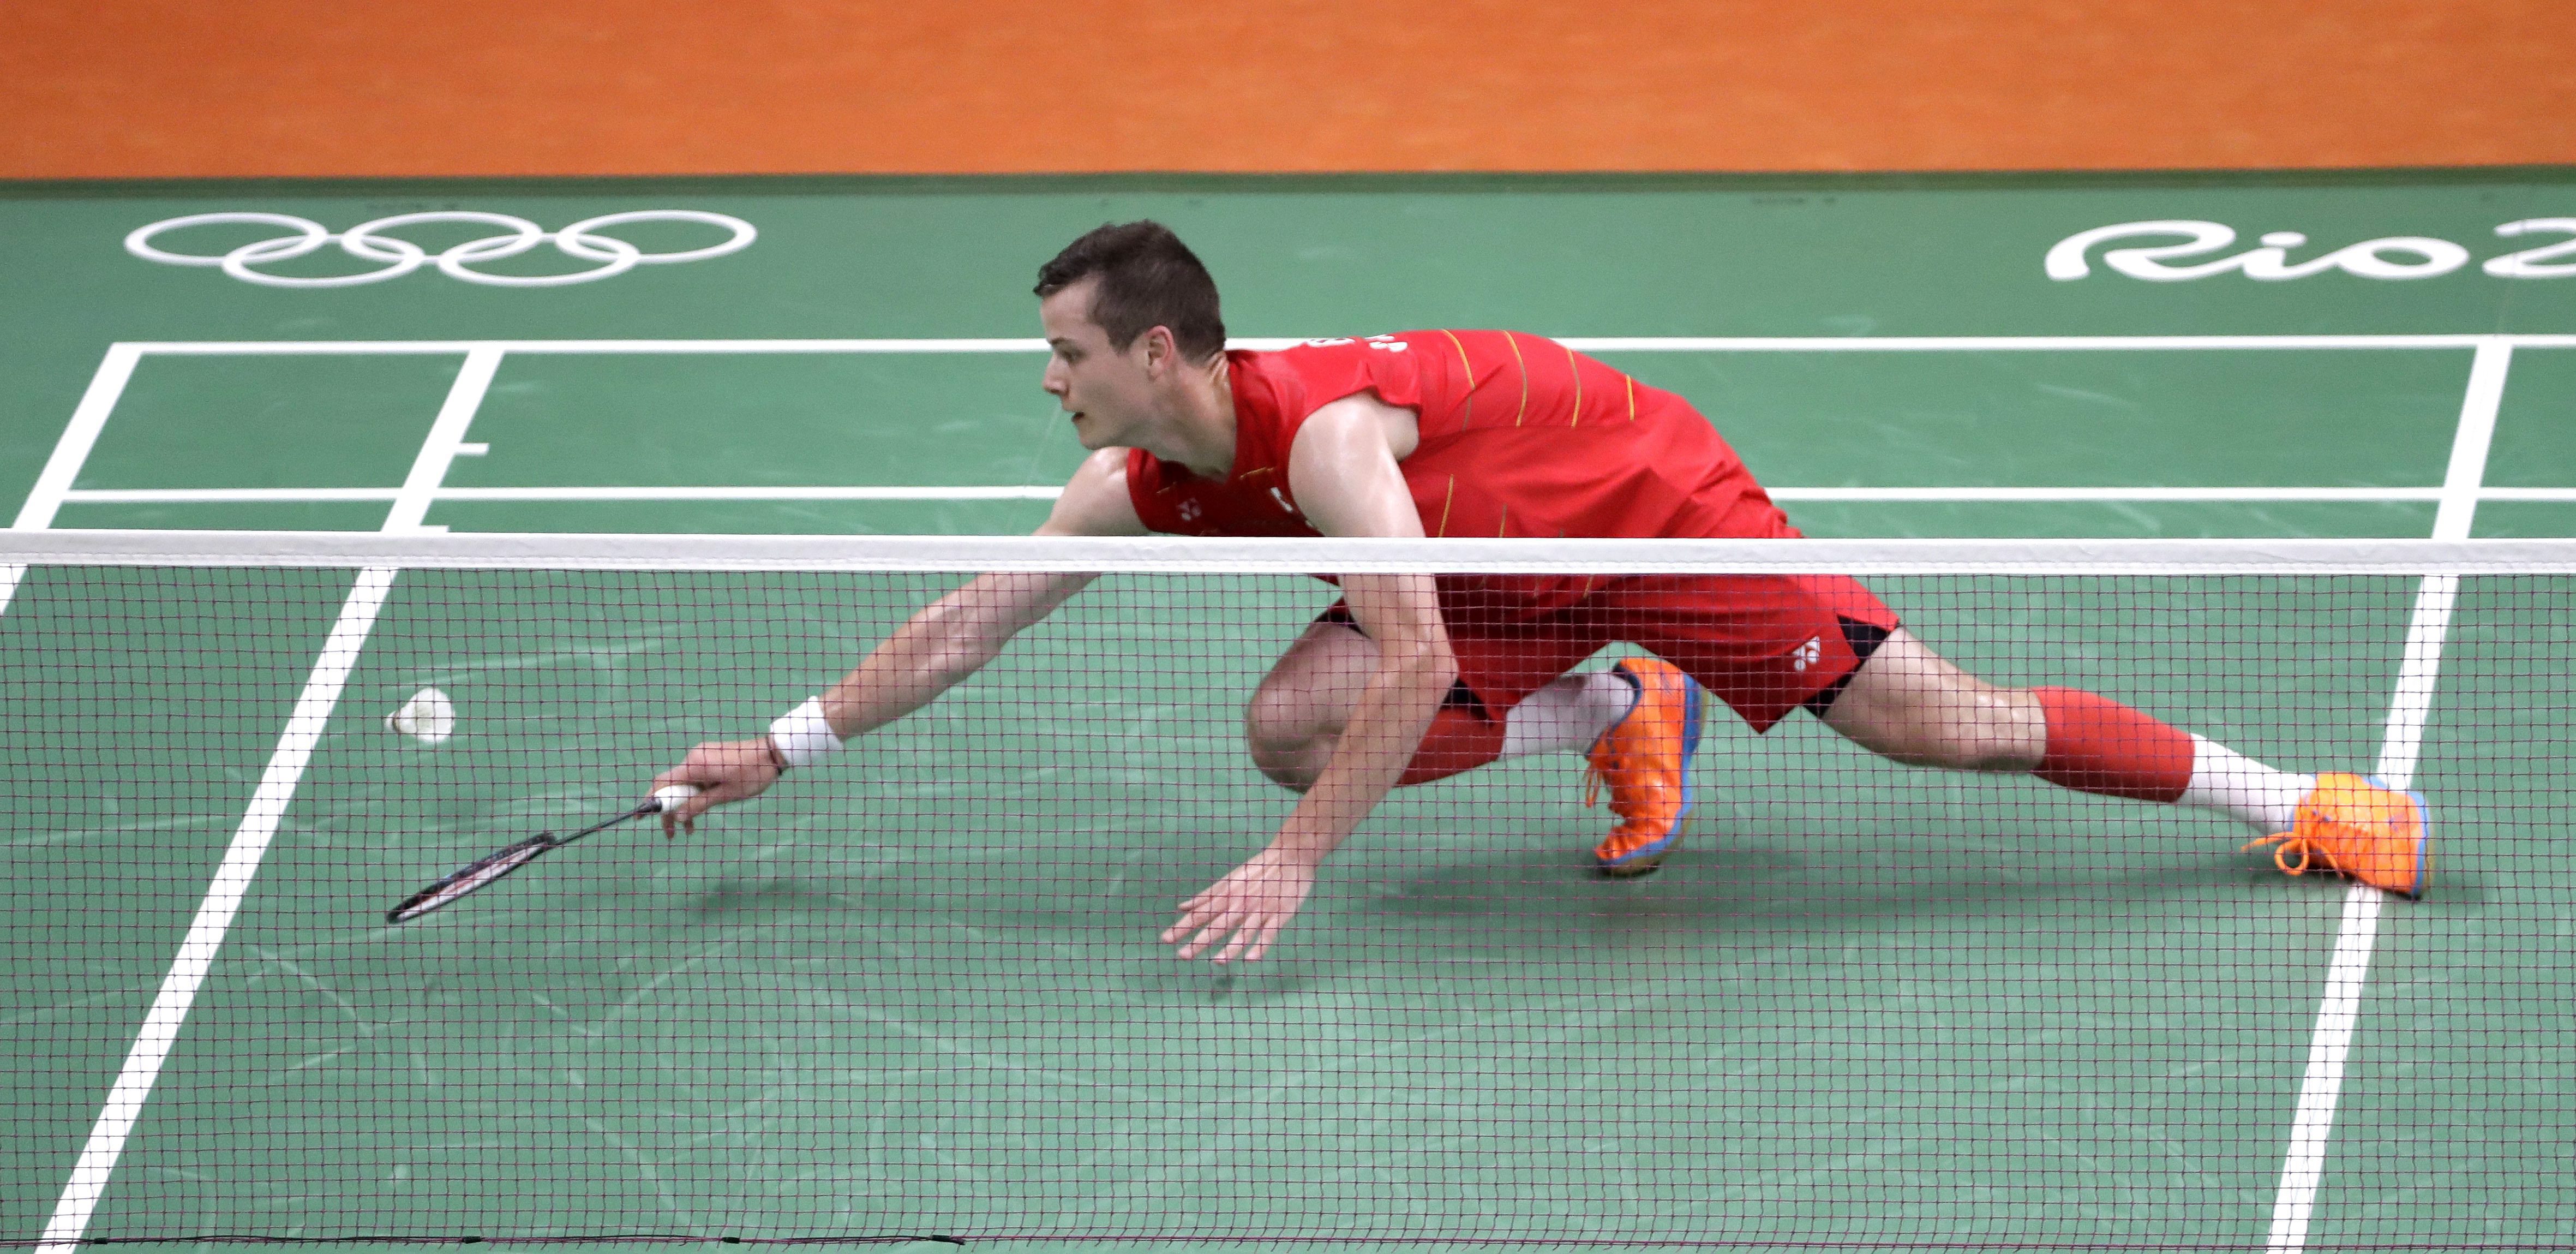 Canada's Martin Giuffre tries to return a shot to Portugal's Pedro Martins during a men's singles badminton match at the 2016 Summer Olympics in Rio de Janeiro, Brazil, Saturday, Aug. 13, 2016. (AP Photo/Mark Humphrey)